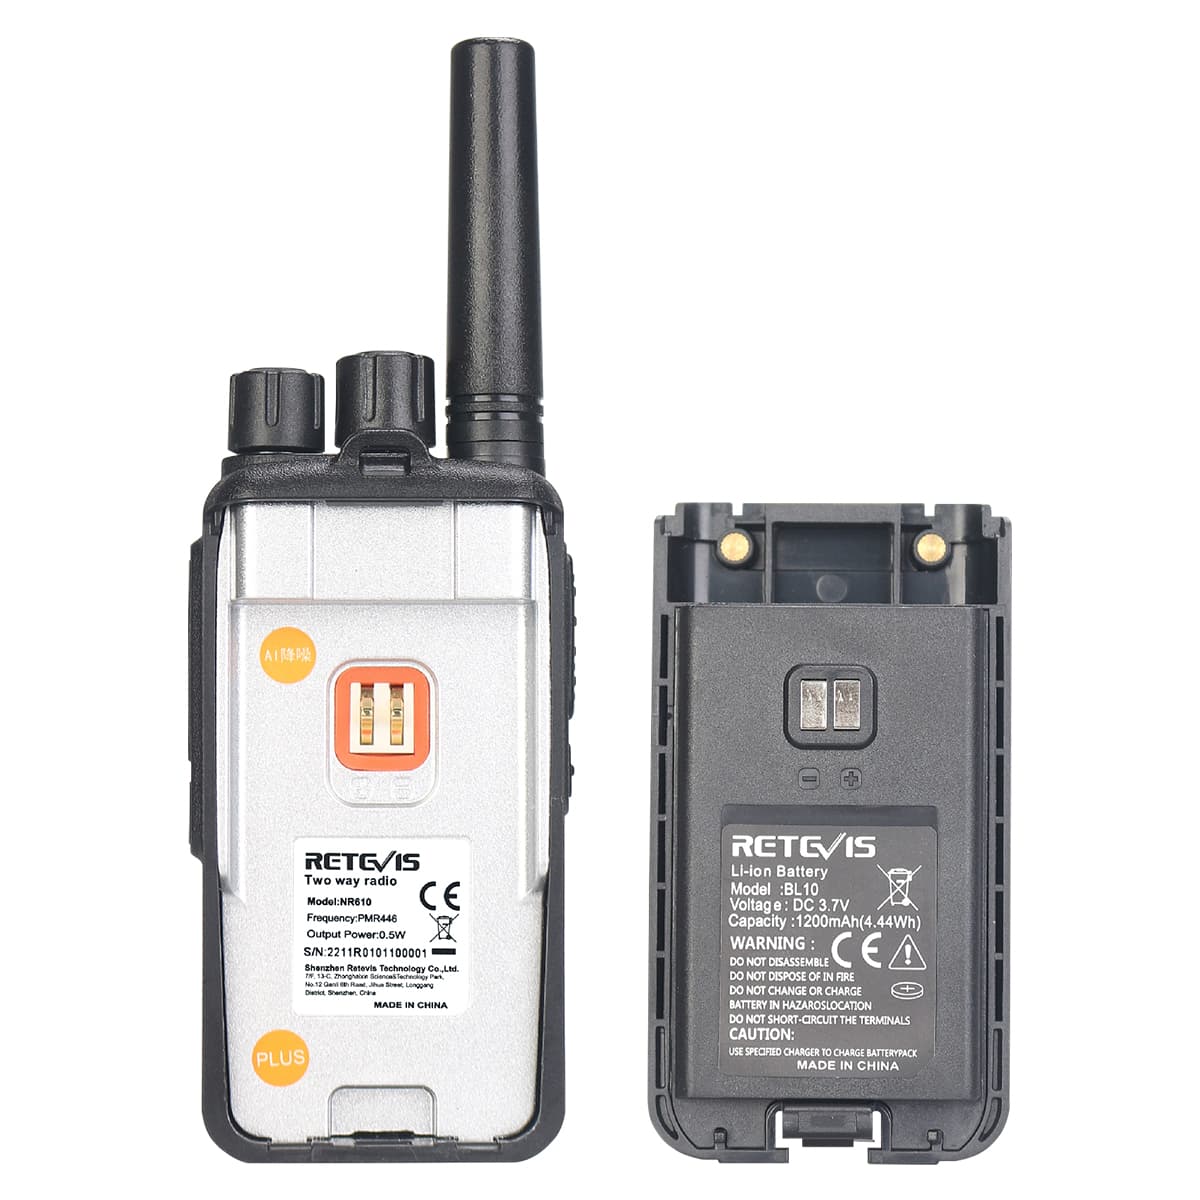 Retevis RT22P Small Portable Walkie Talkies with Six-Unit Charger